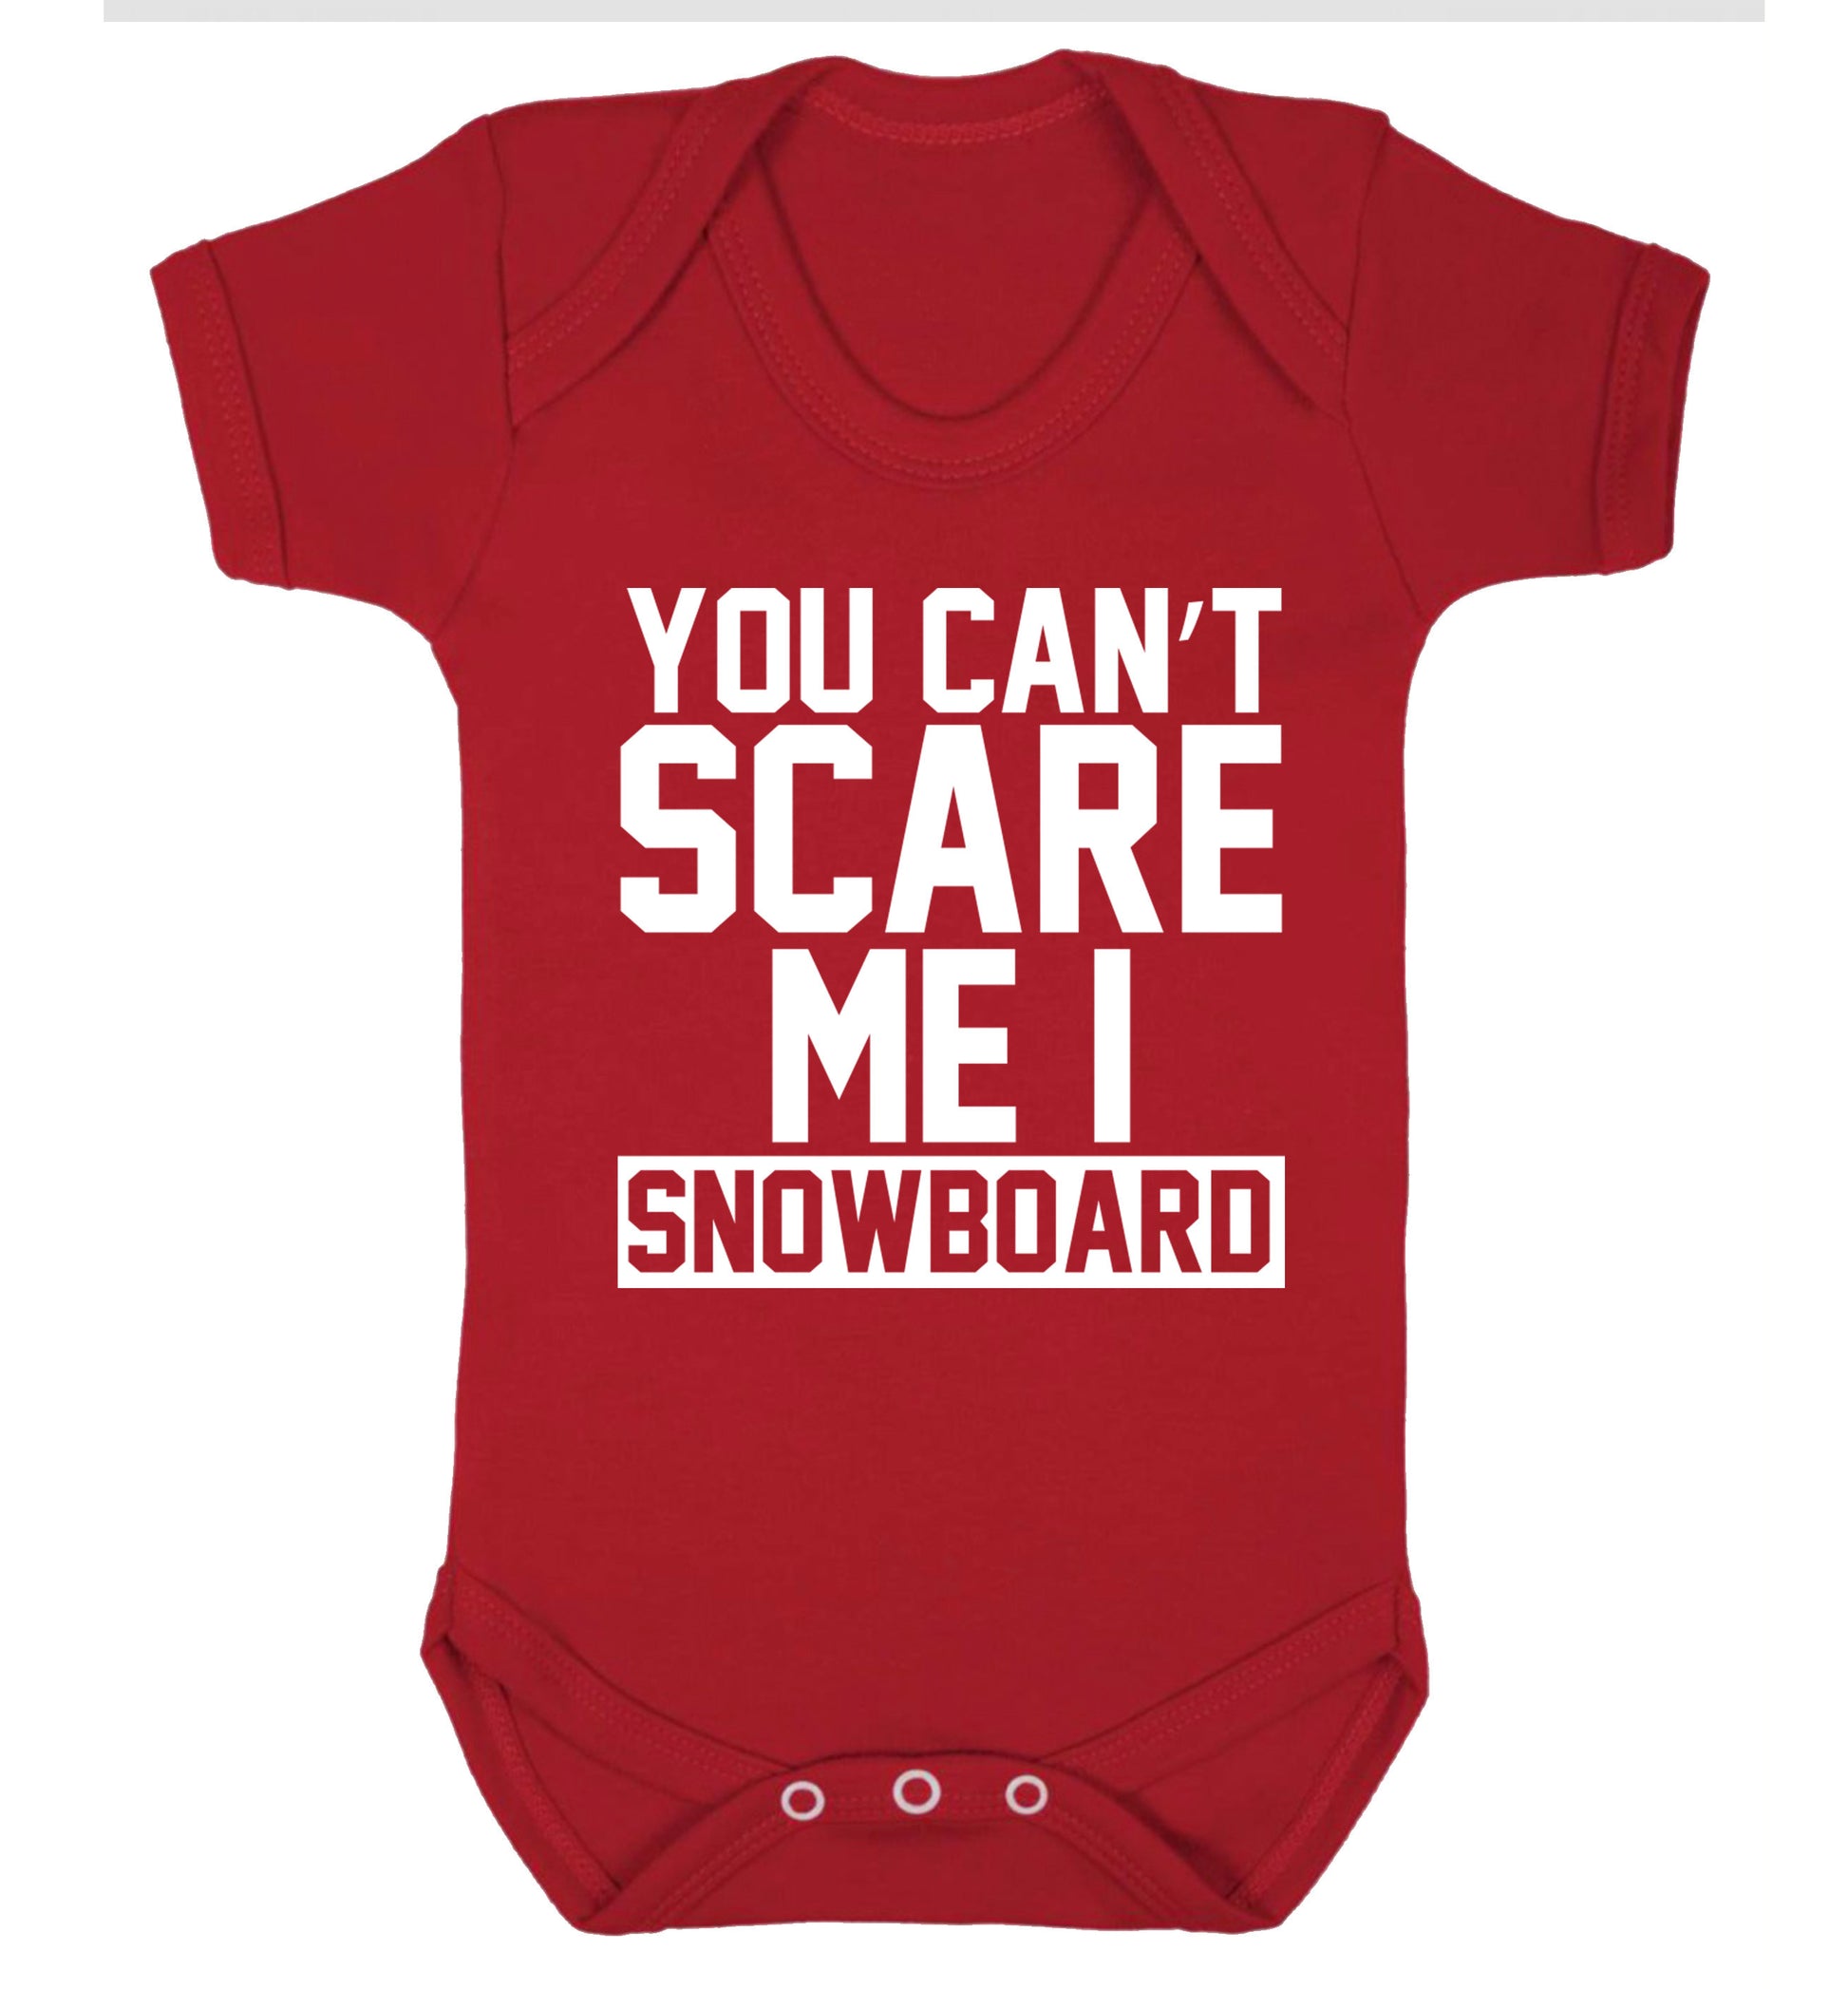 You can't scare me I snowboard Baby Vest red 18-24 months